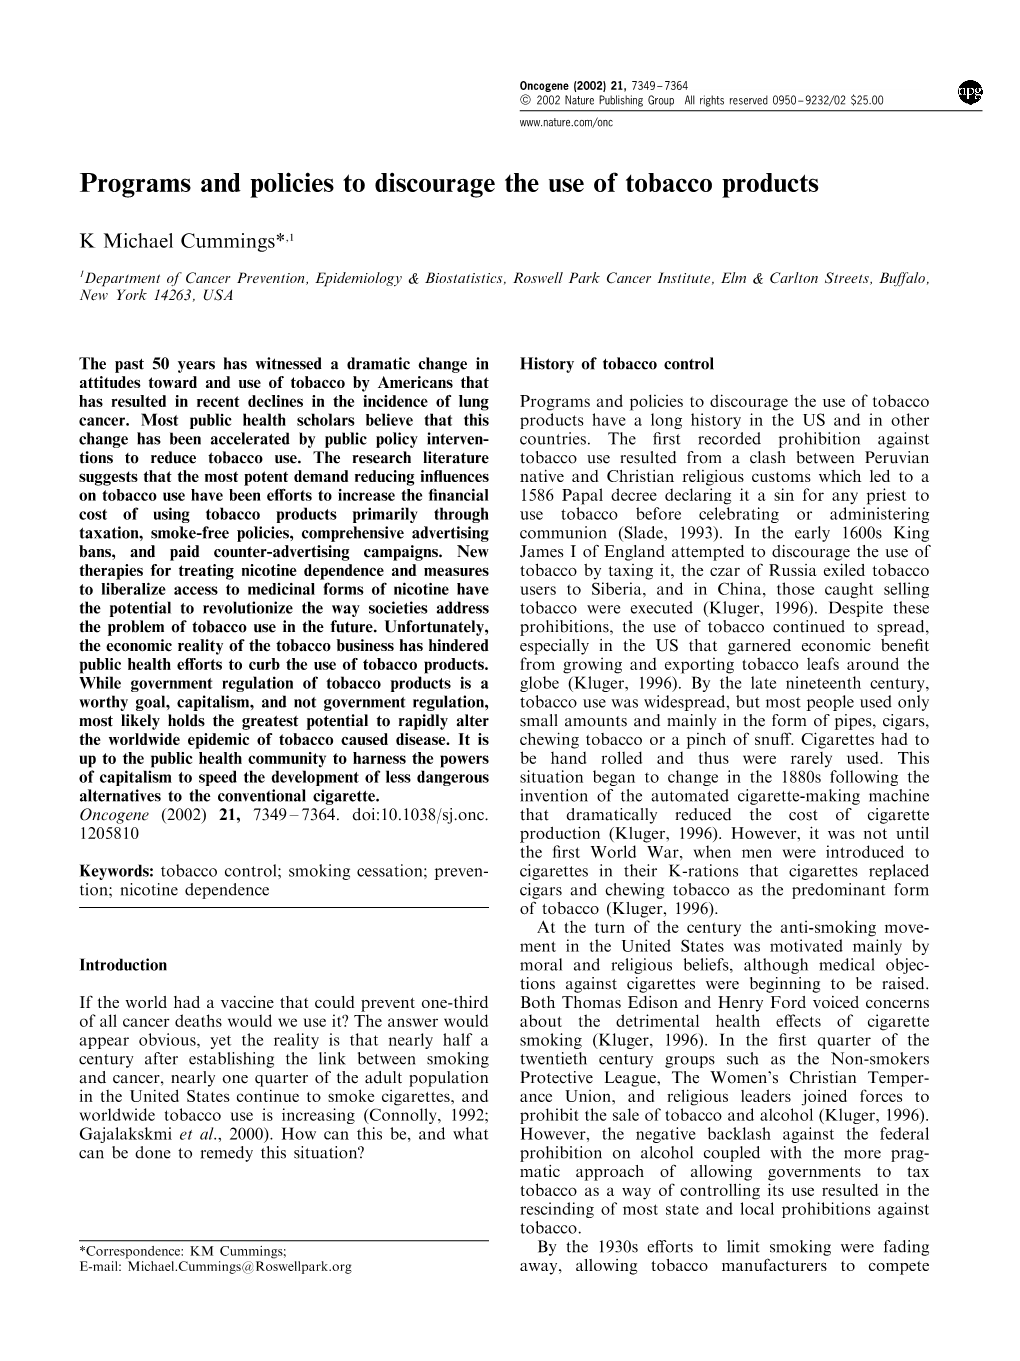 Programs and Policies to Discourage the Use of Tobacco Products